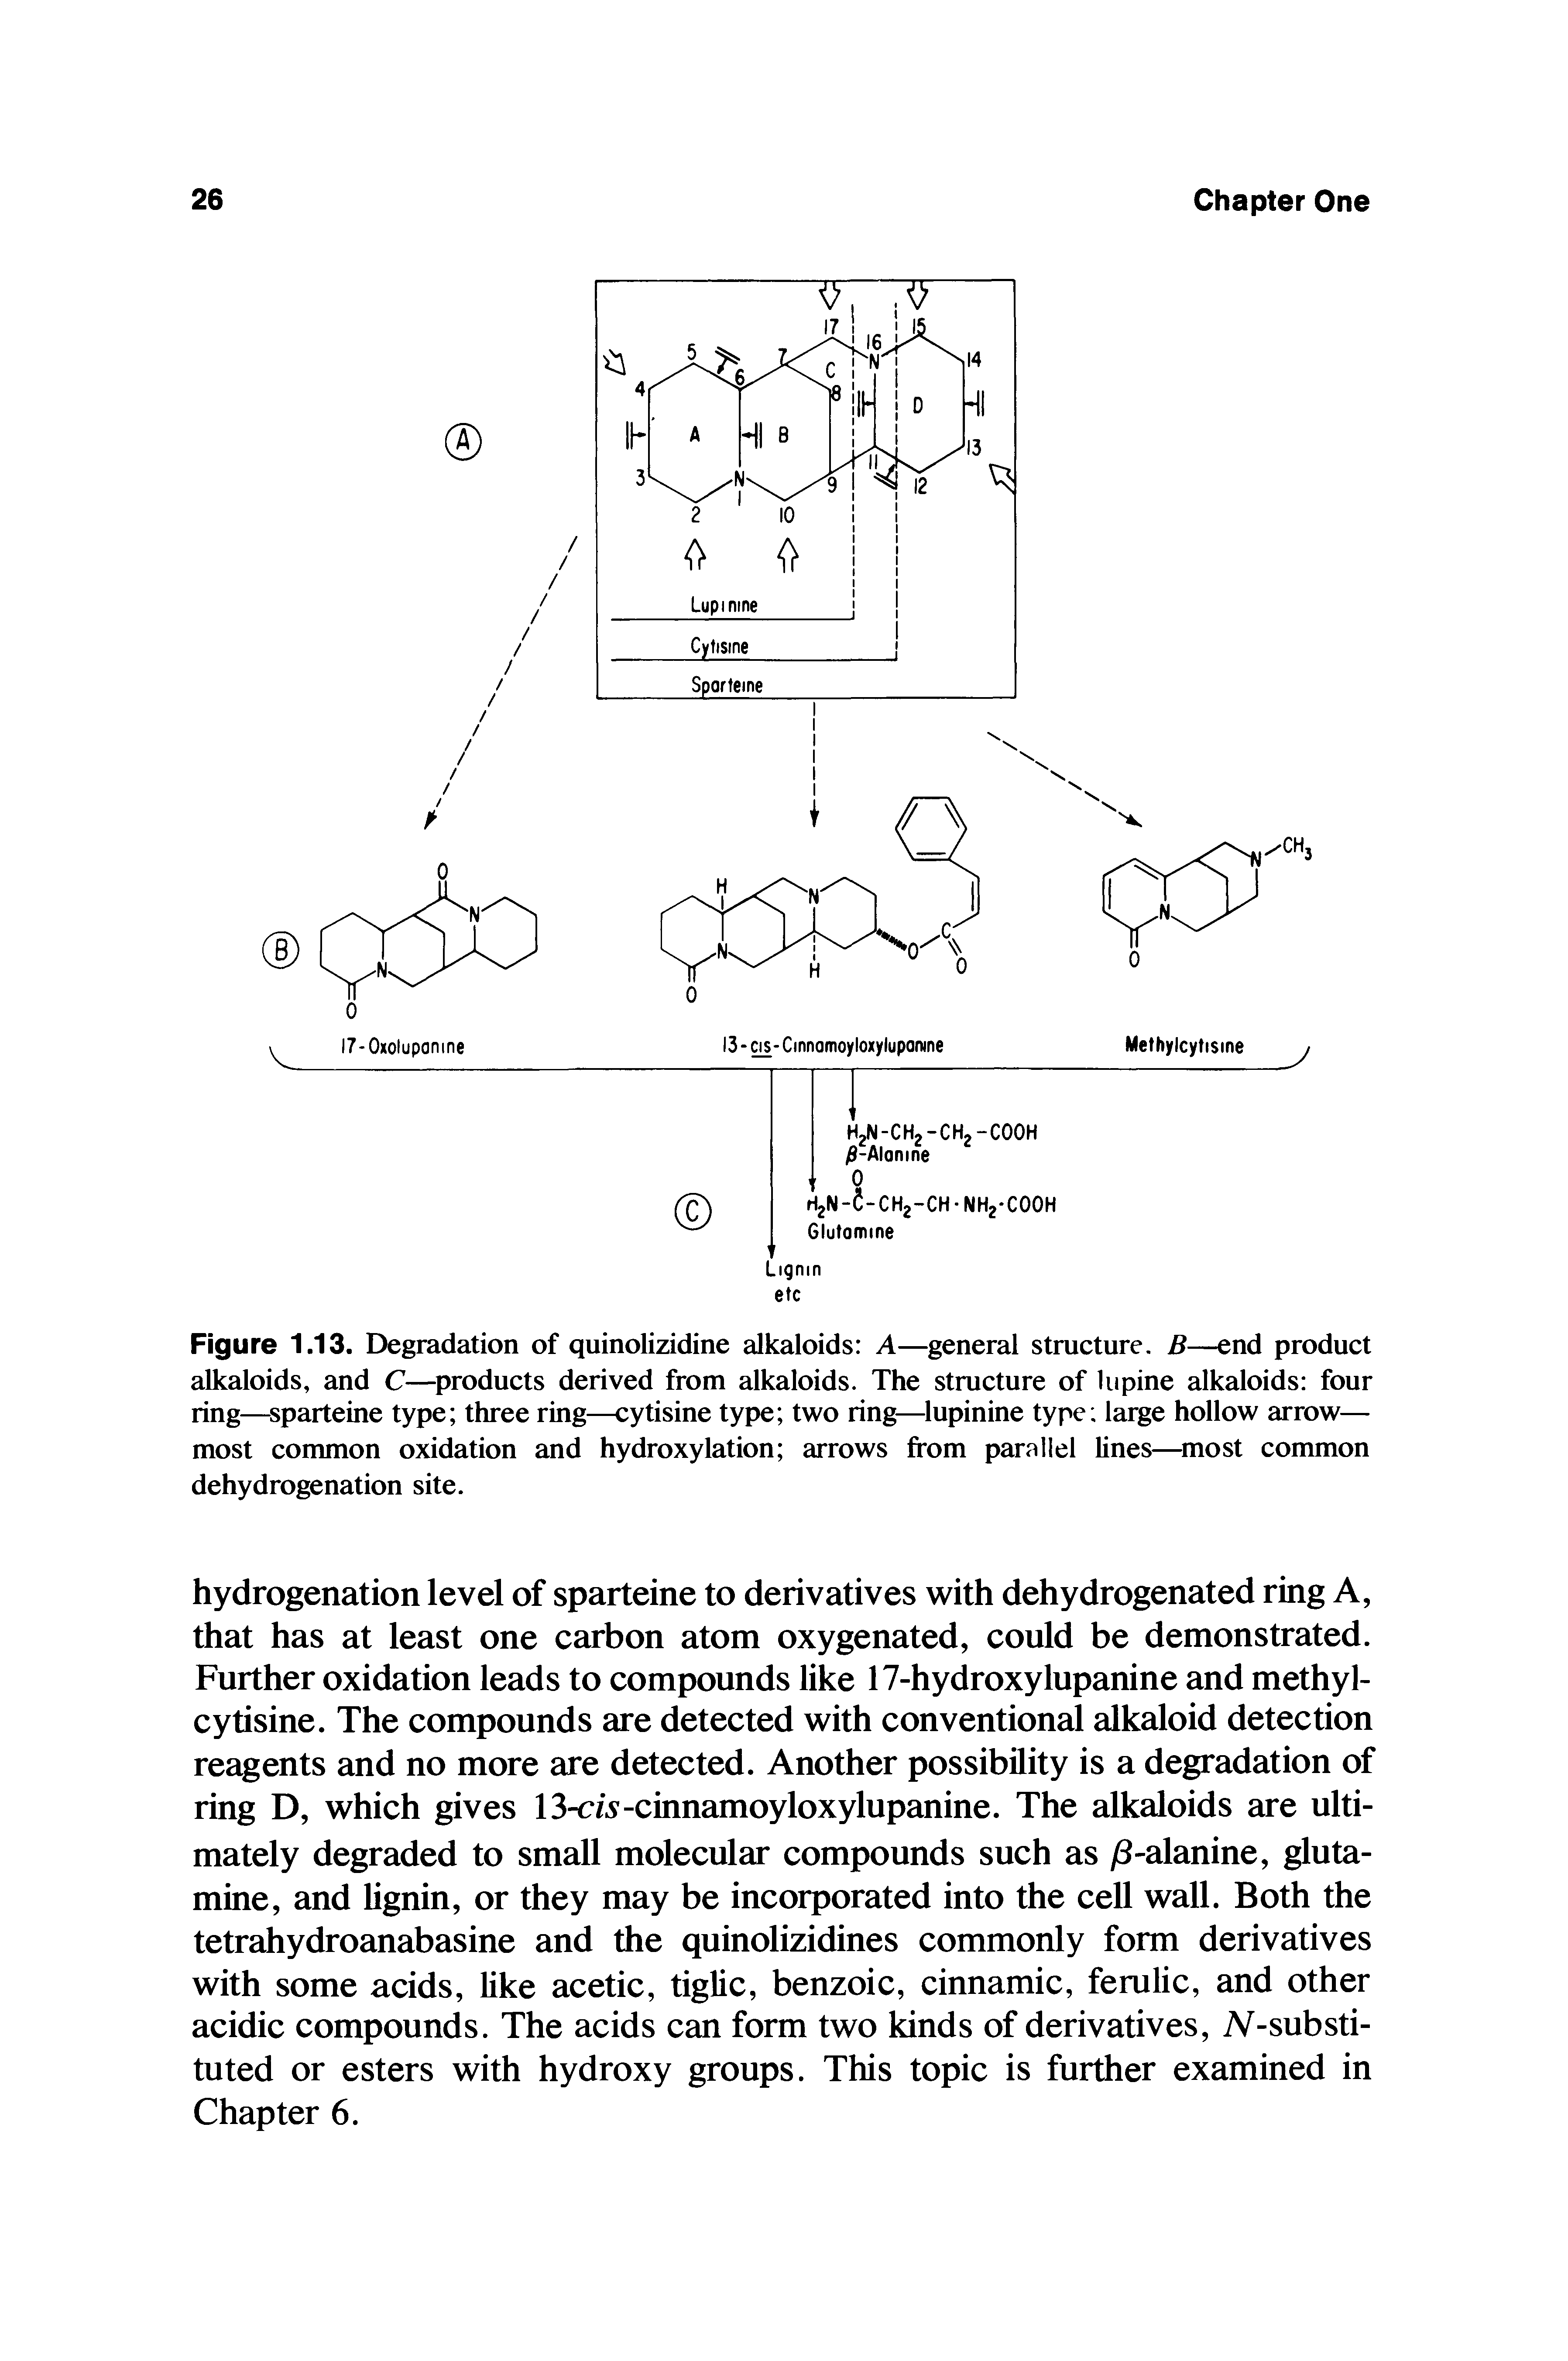 Figure 1.13. Degradation of quinolizidine alkaloids A—general structure. B—end product alkaloids, and C— products derived from alkaloids. The structure of lupine alkaloids four ring— sparteine type three ring—cytisine type two ring— lupinine type laige hollow arrow— most common oxidation and hydroxylation arrows from parallel lines— most common dehydrogenation site.